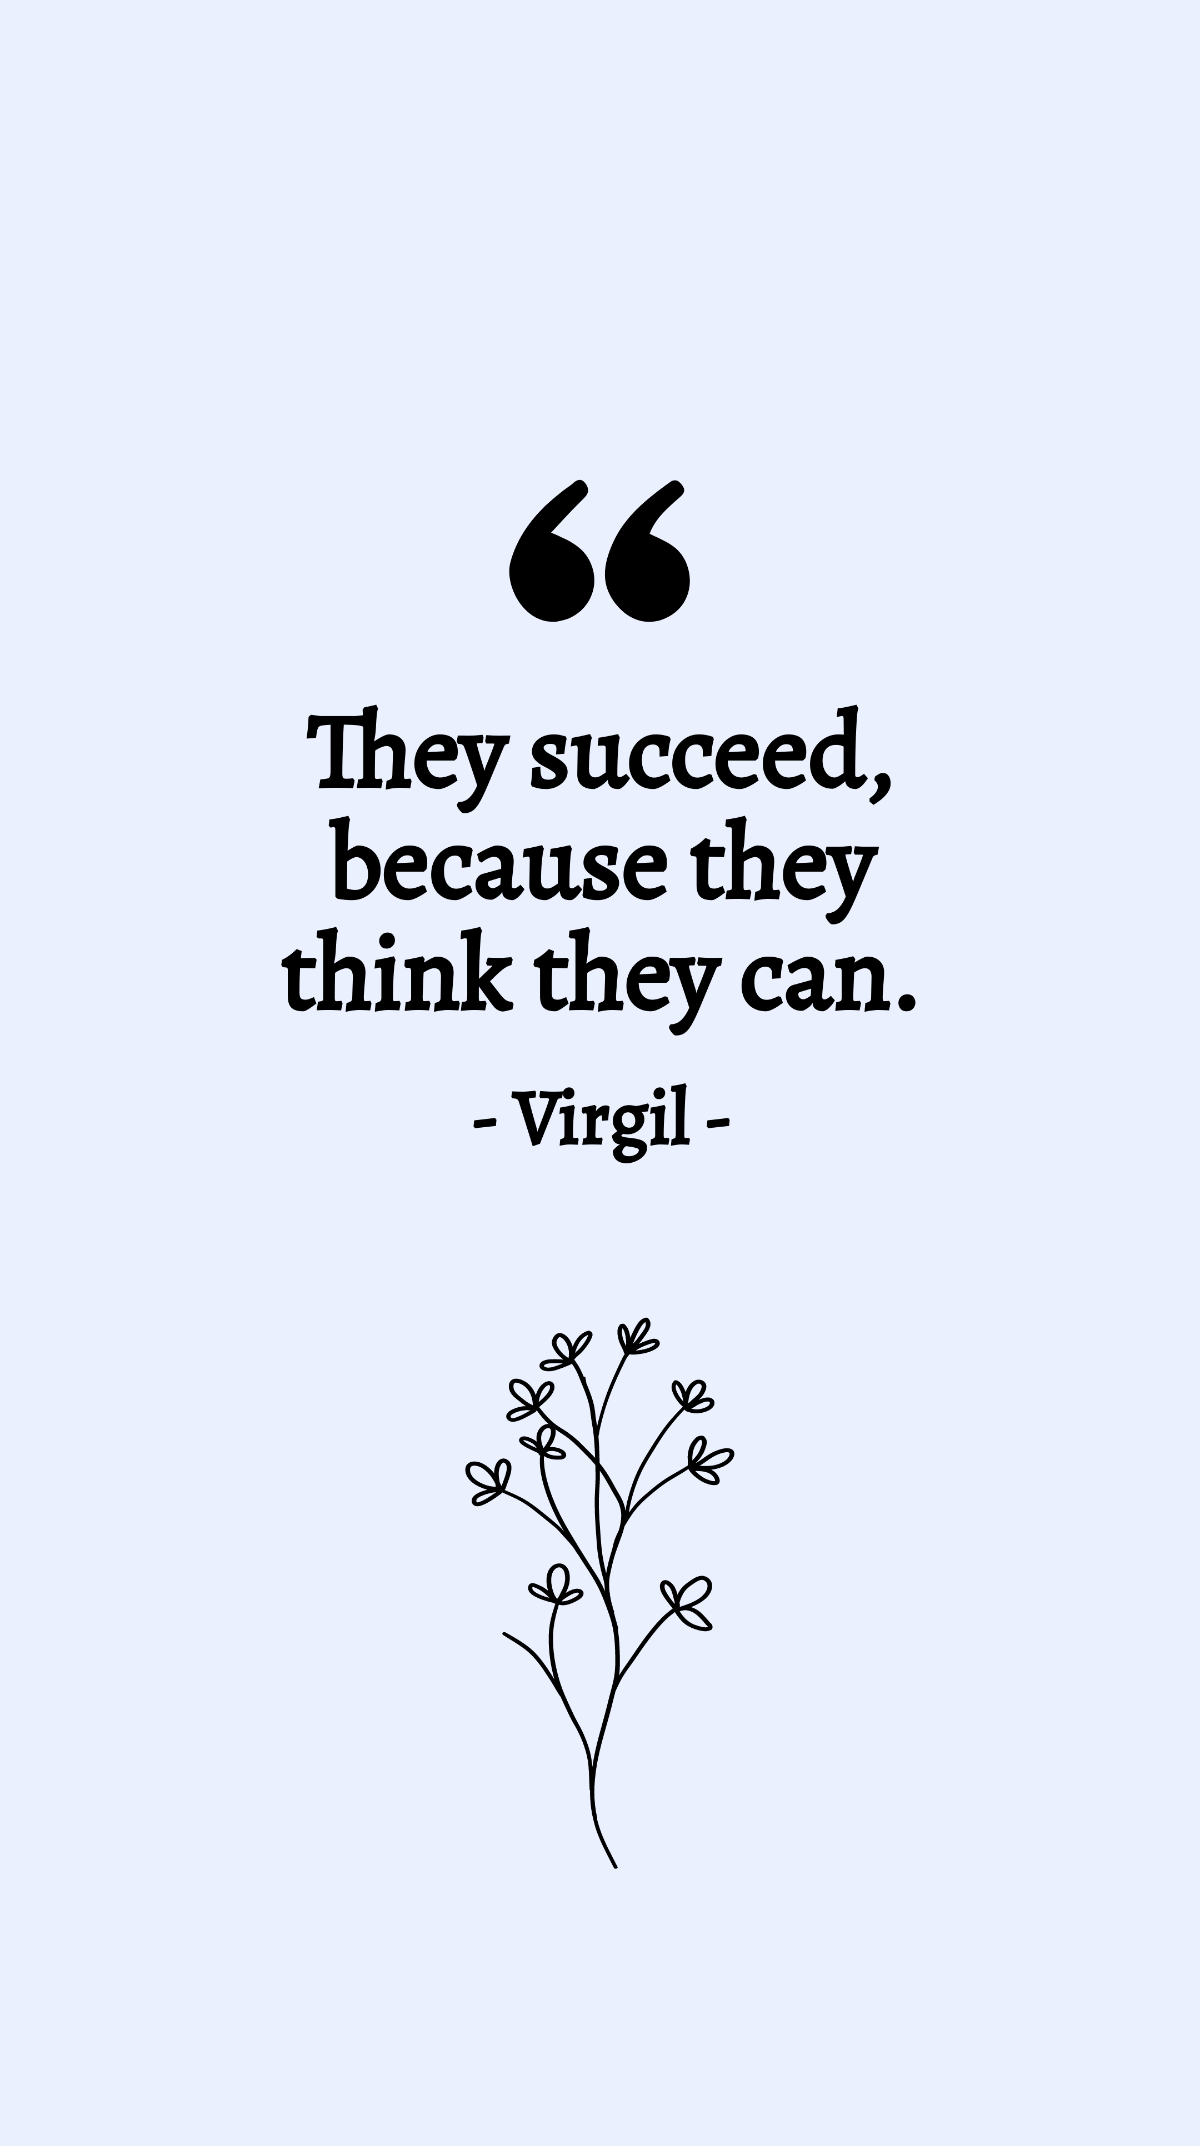 Free Virgil - They succeed, because they think they can. Template